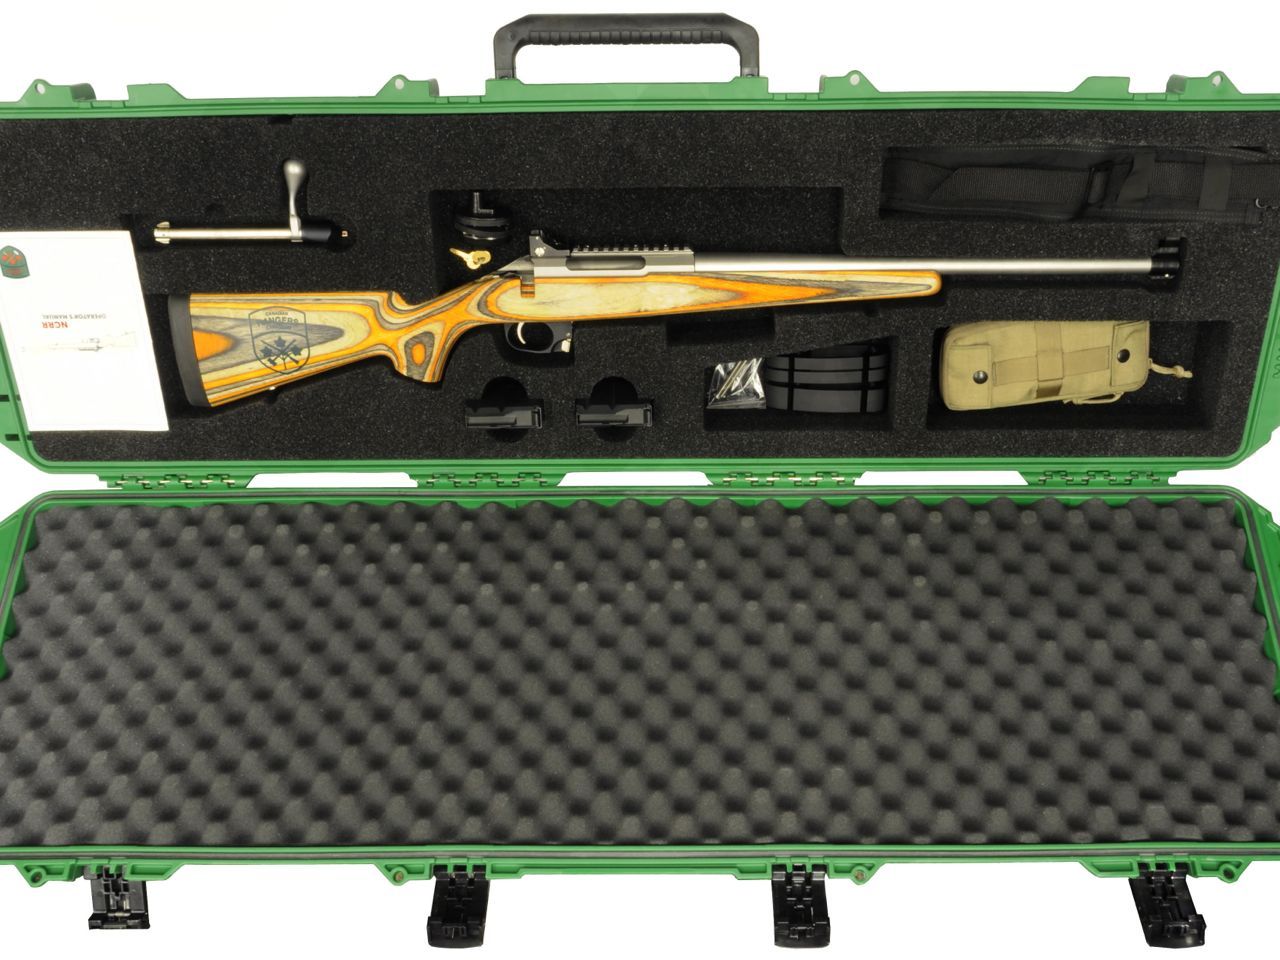 Here it is – the new Sako rifle for the Canadian Rangers